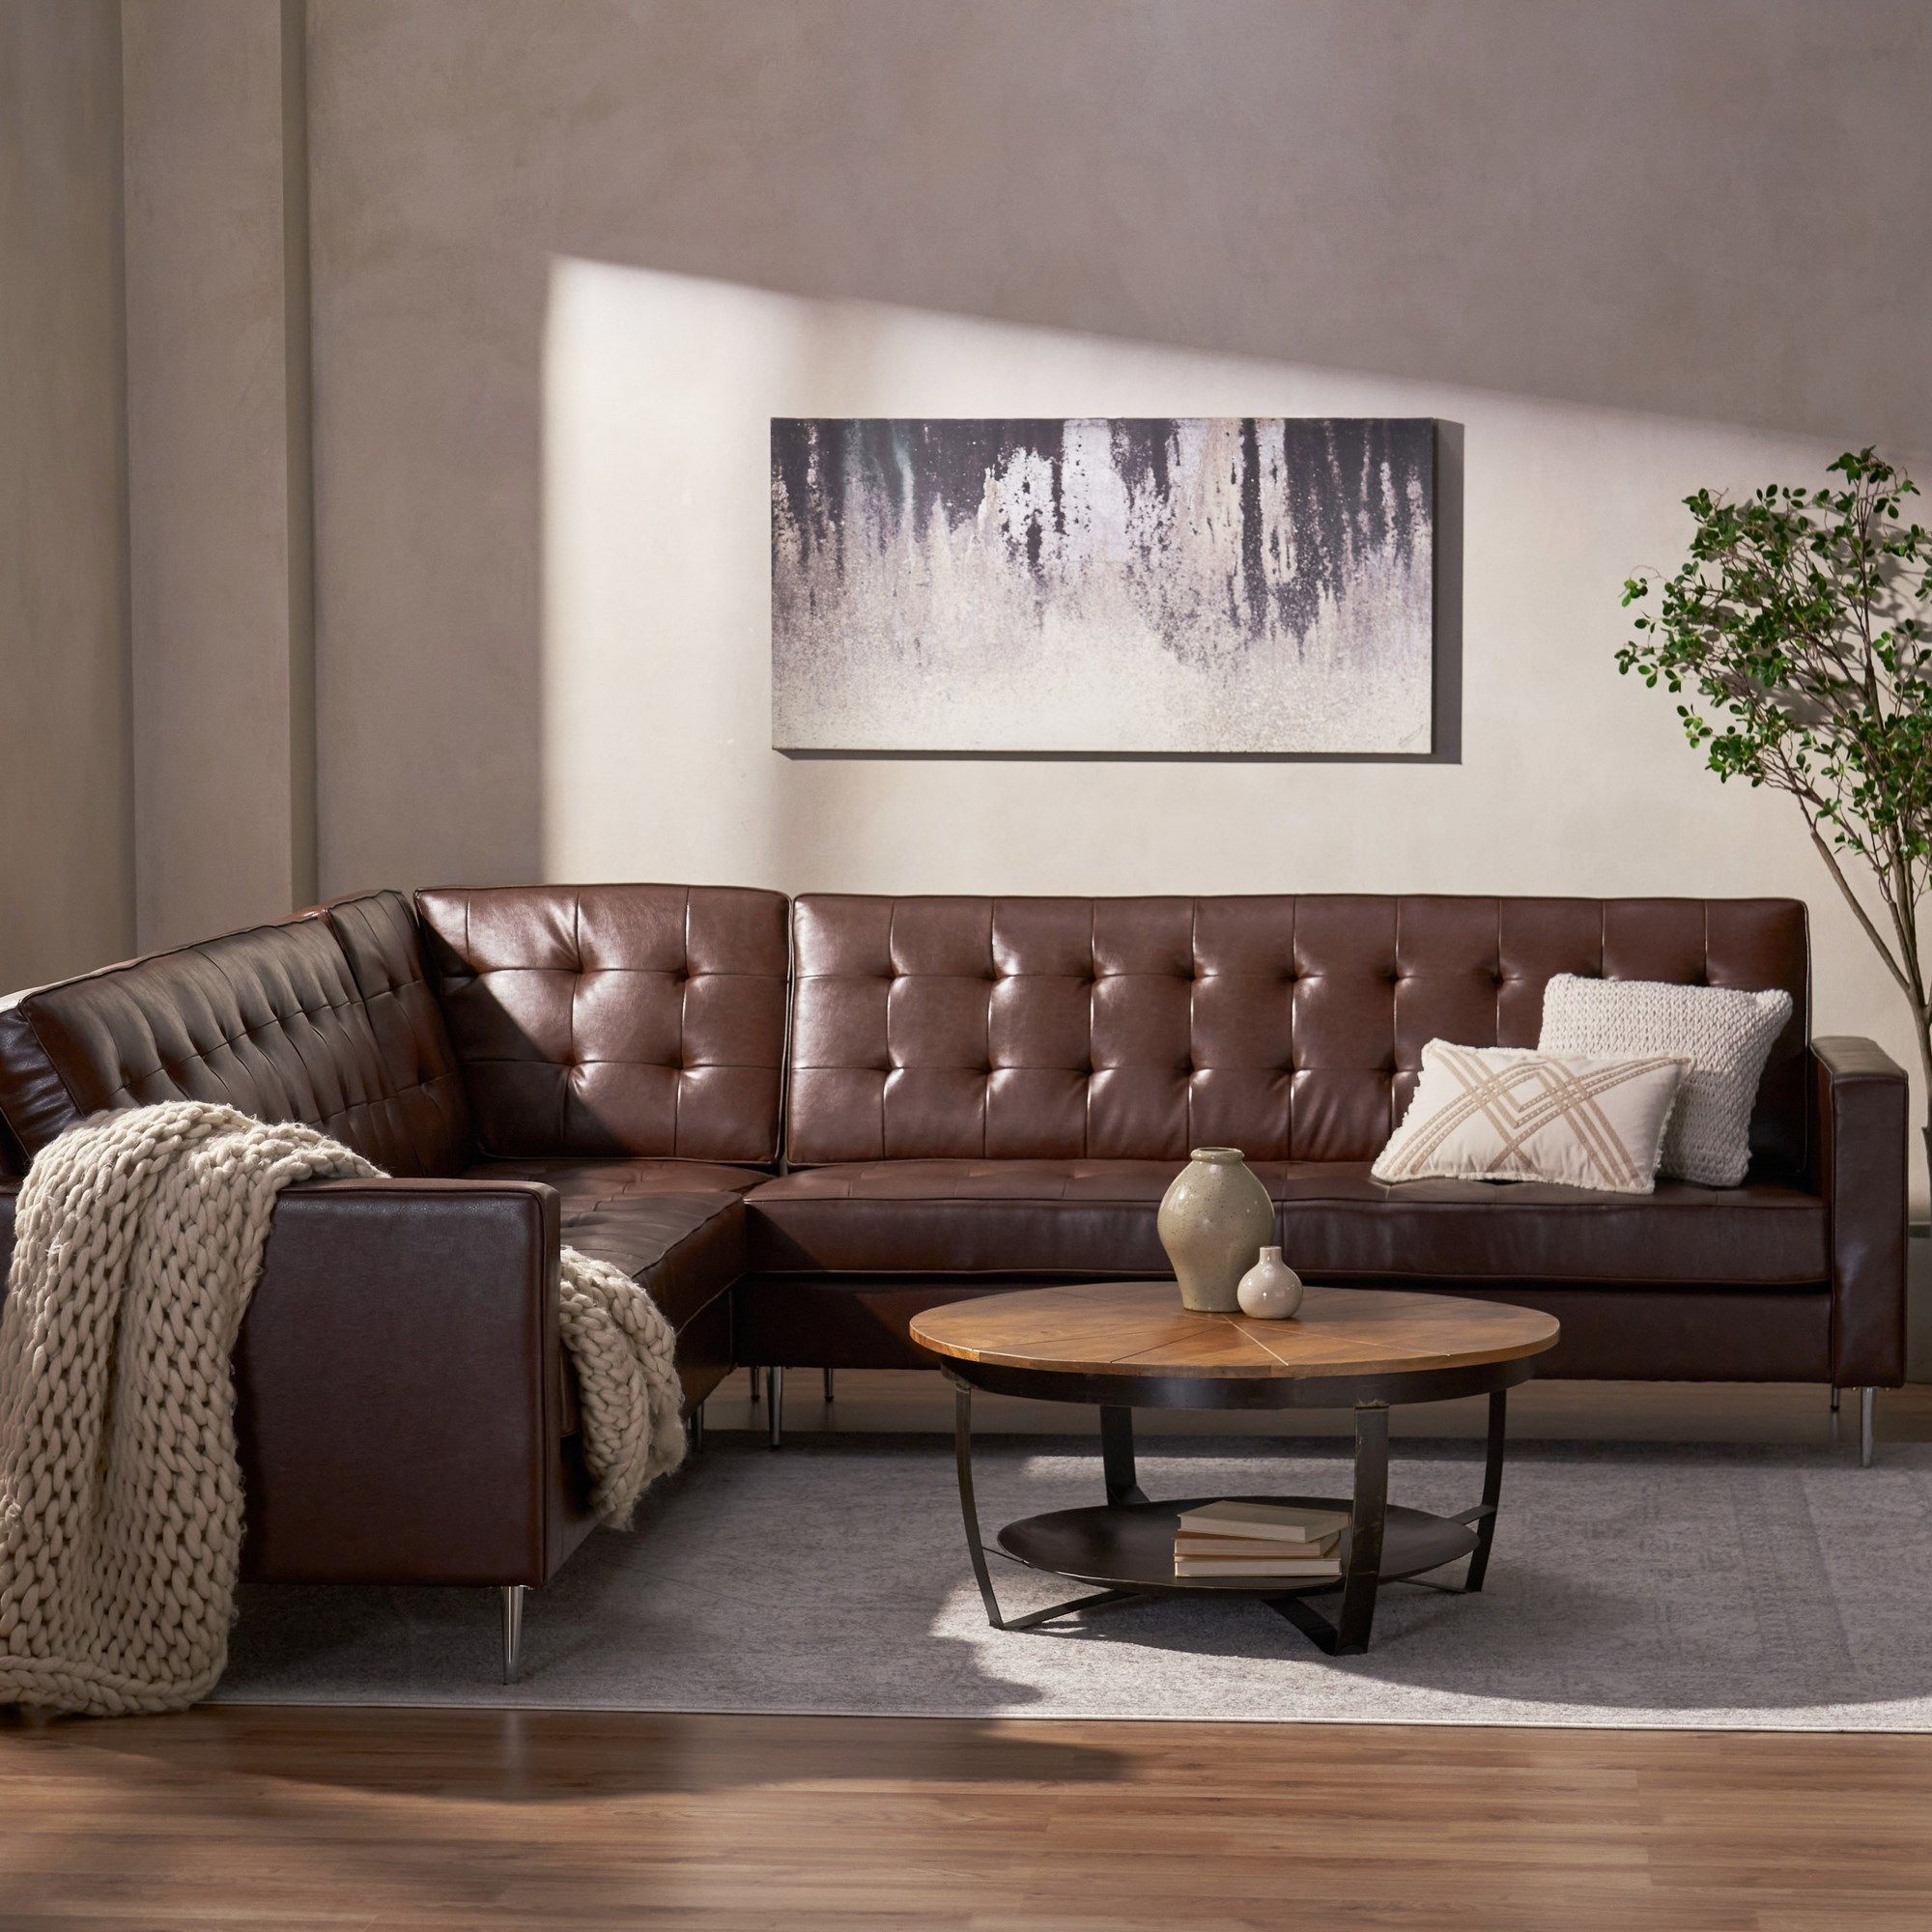 Gebo Contemporary Faux Leather Tufted 5 Seater Sectional Sofa Set, Dark  Brown And Chrome Inside Faux Leather Sectional Sofa Sets (View 4 of 15)